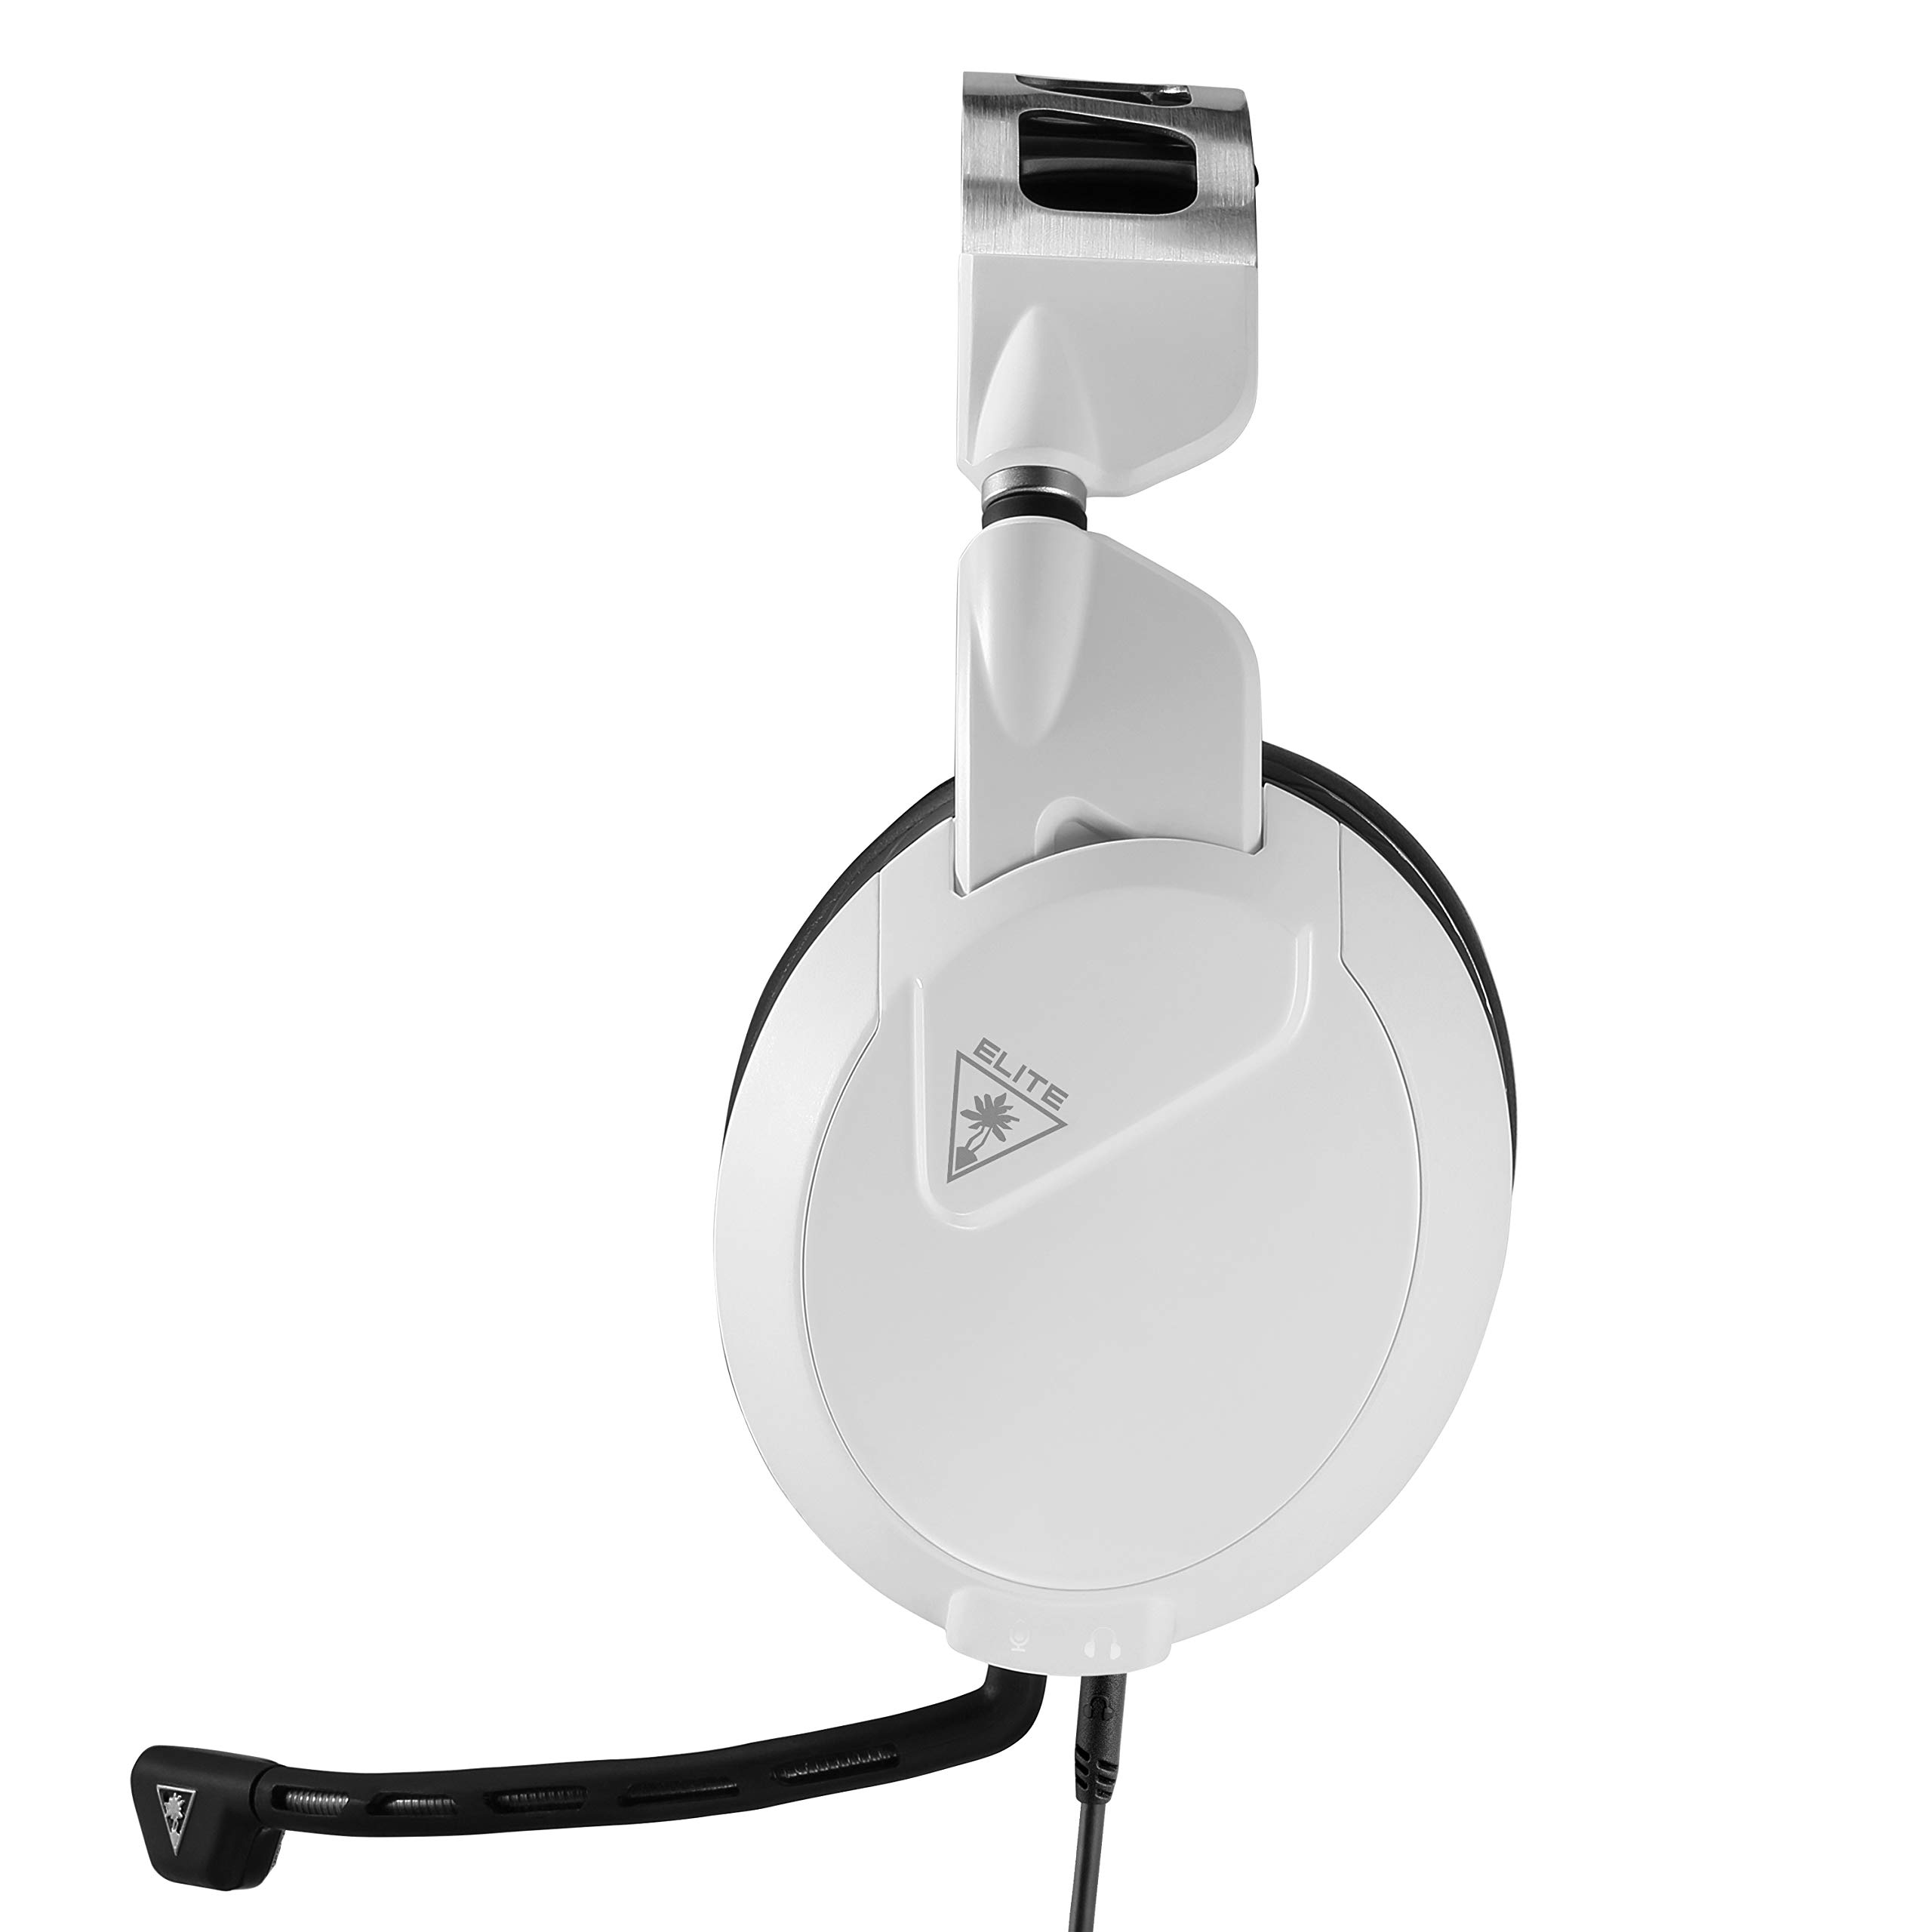 Turtle Beach Elite Pro 2 Performance Gaming Headset for PC & Mobile with 3.5mm, Xbox Series X| S, Xbox One, PS5, PS4, PlayStation, Nintendo Switch – 50mm Speakers, Metal Headband - White